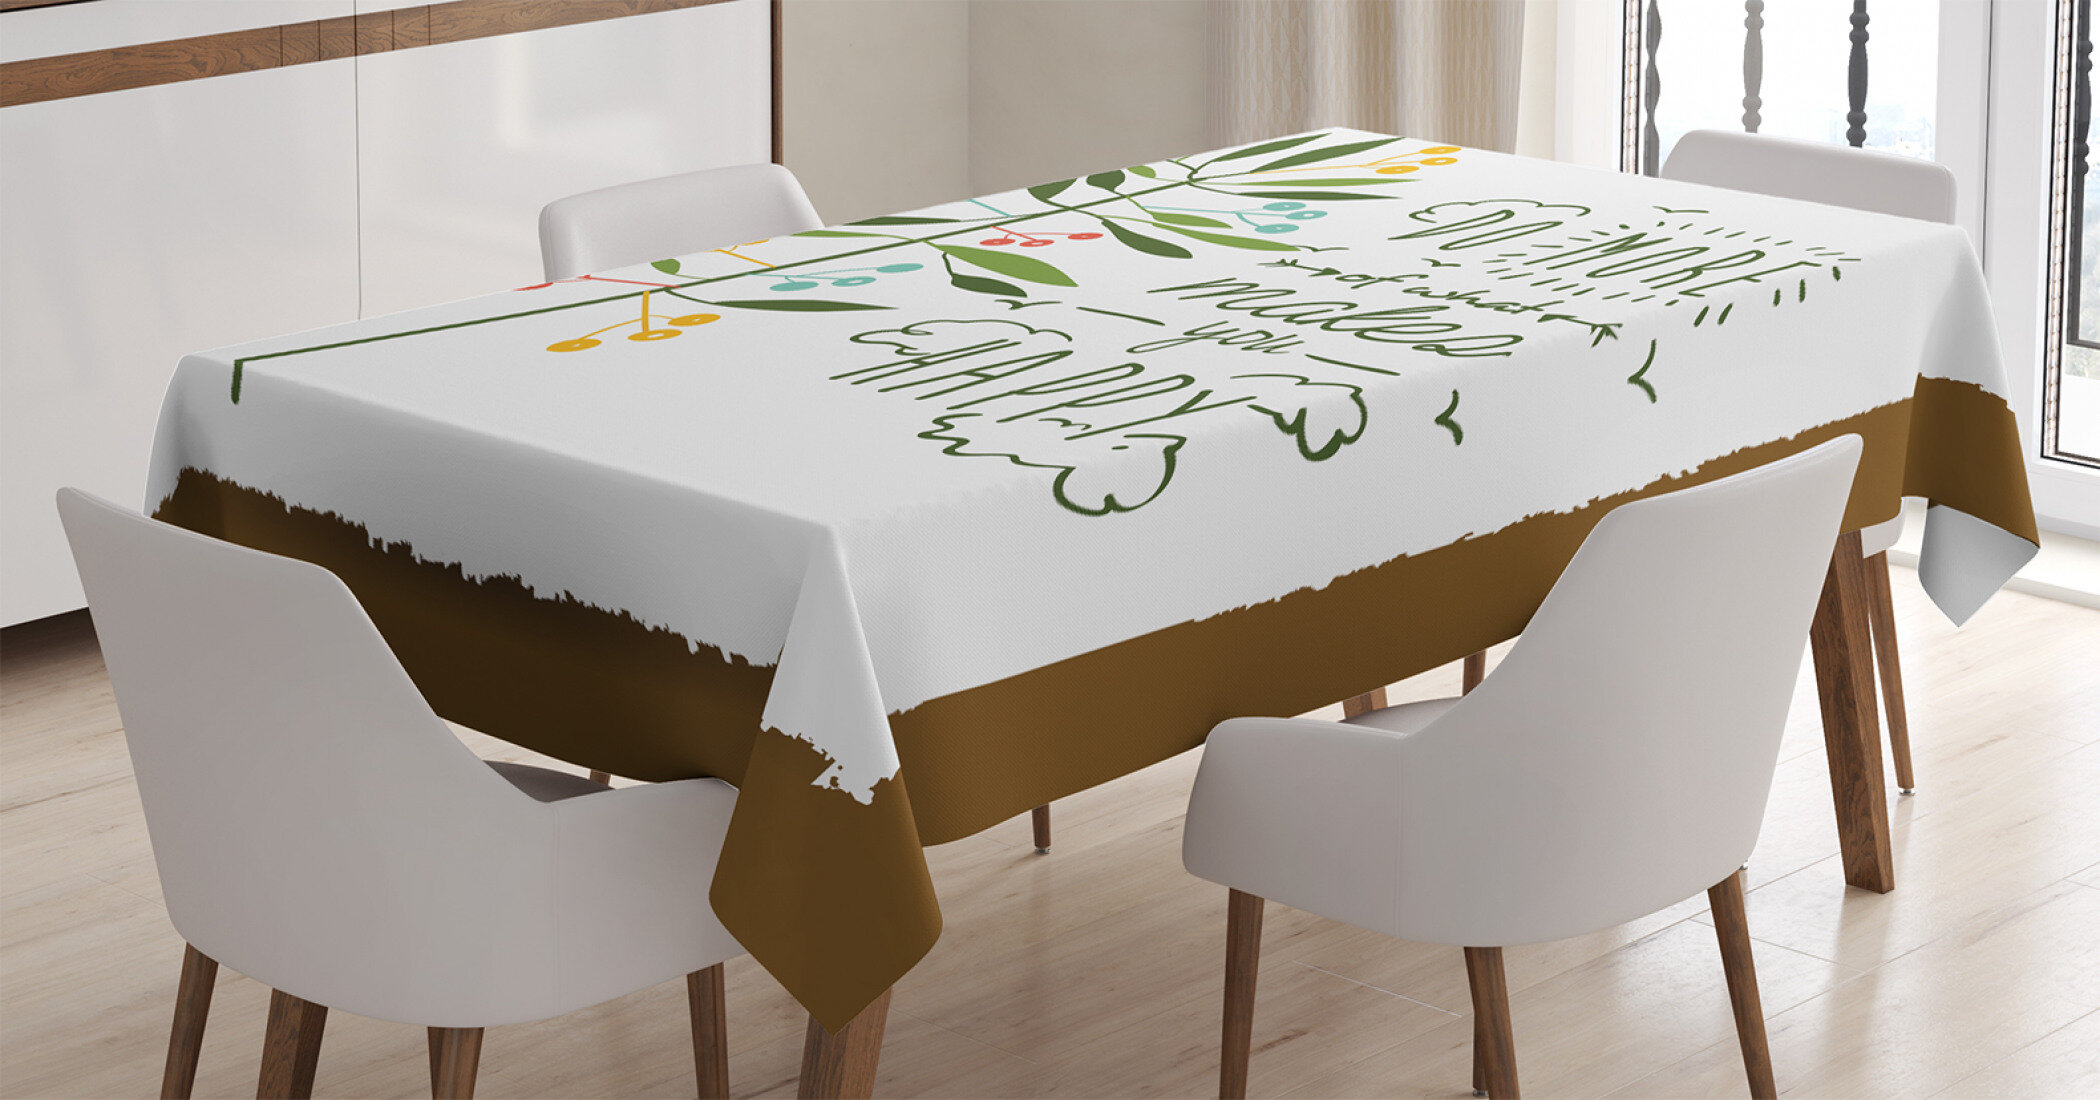 Botany Inspired Illustration with Flourishing Nature Butterflies and Ladybugs Dining Room Kitchen Rectangular Table Cover Multicolor Ambesonne Garden Art Tablecloth 60 X 84